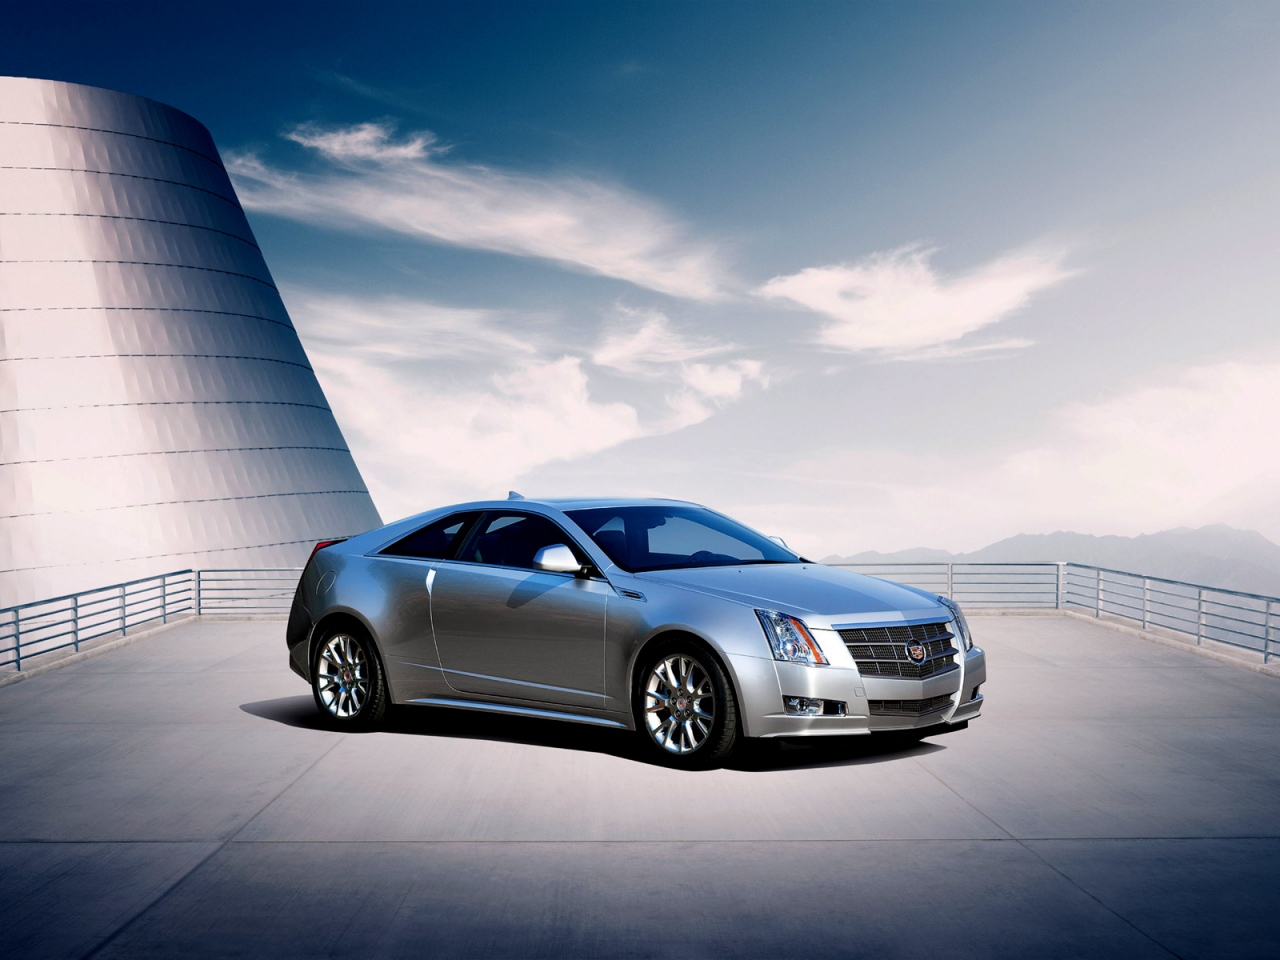 2011 Cadillac CTS Coupe for 1280 x 960 resolution